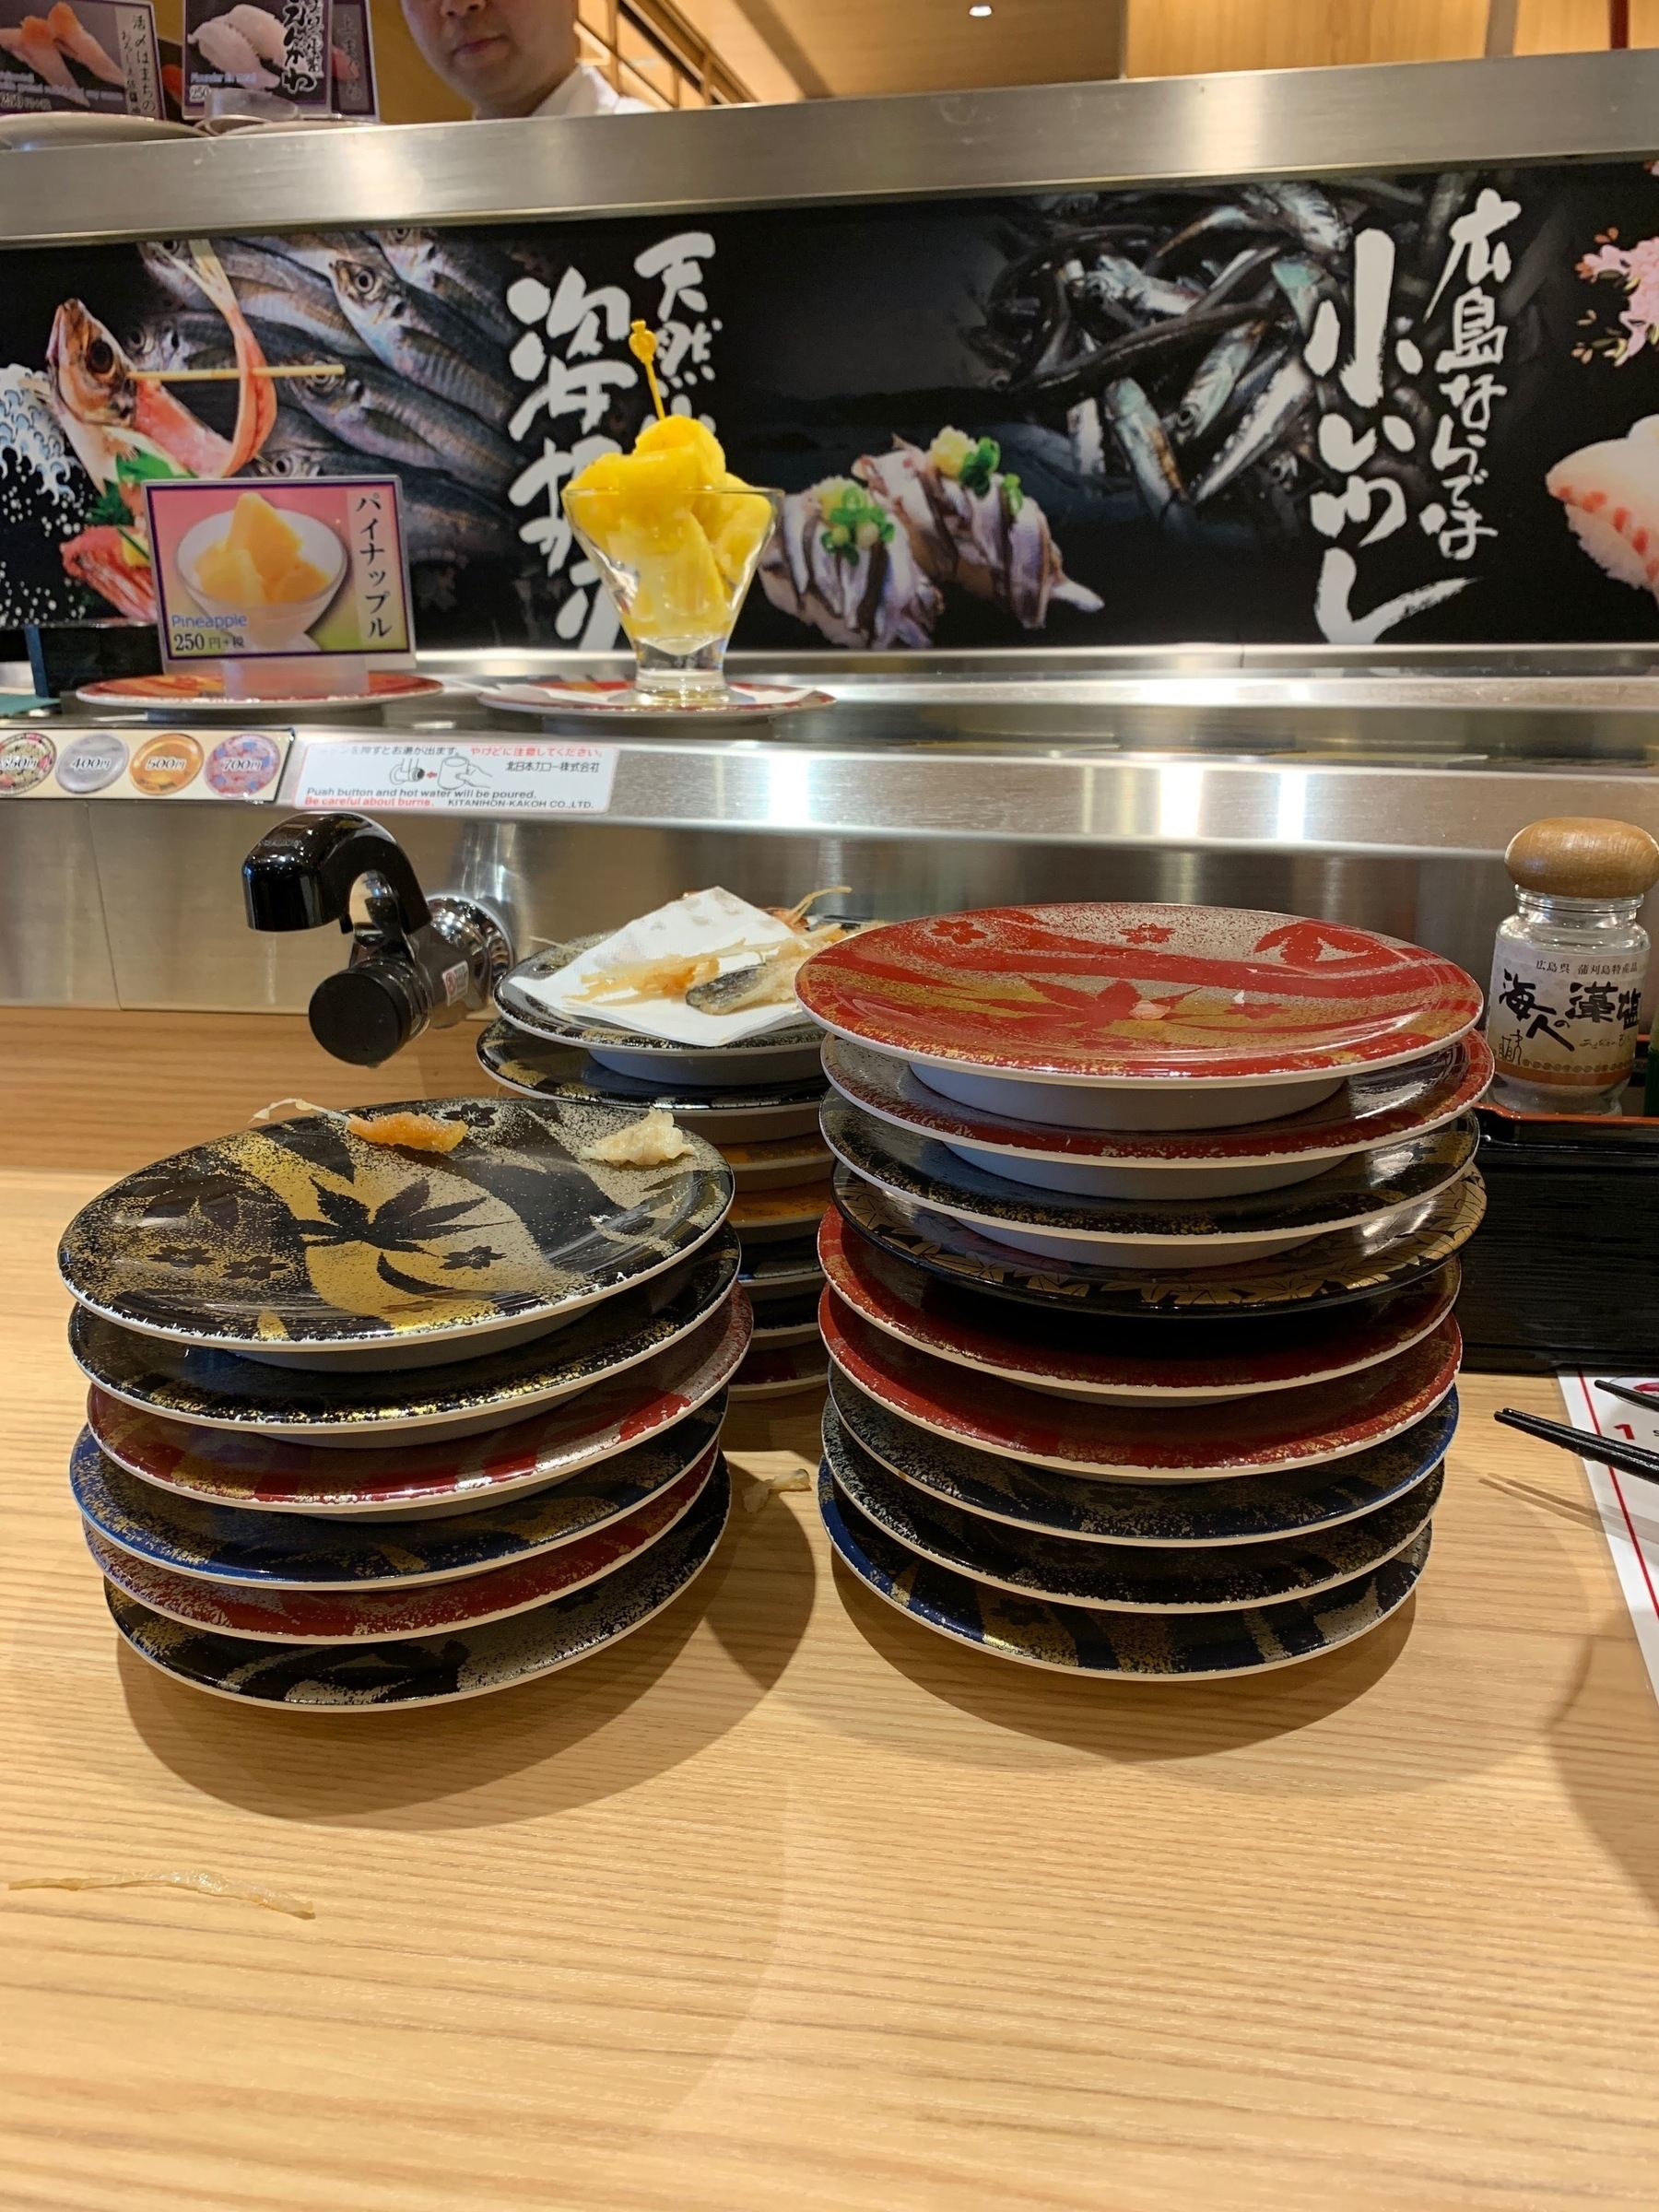 Empty plates stacked on one another in a sushi restaurant